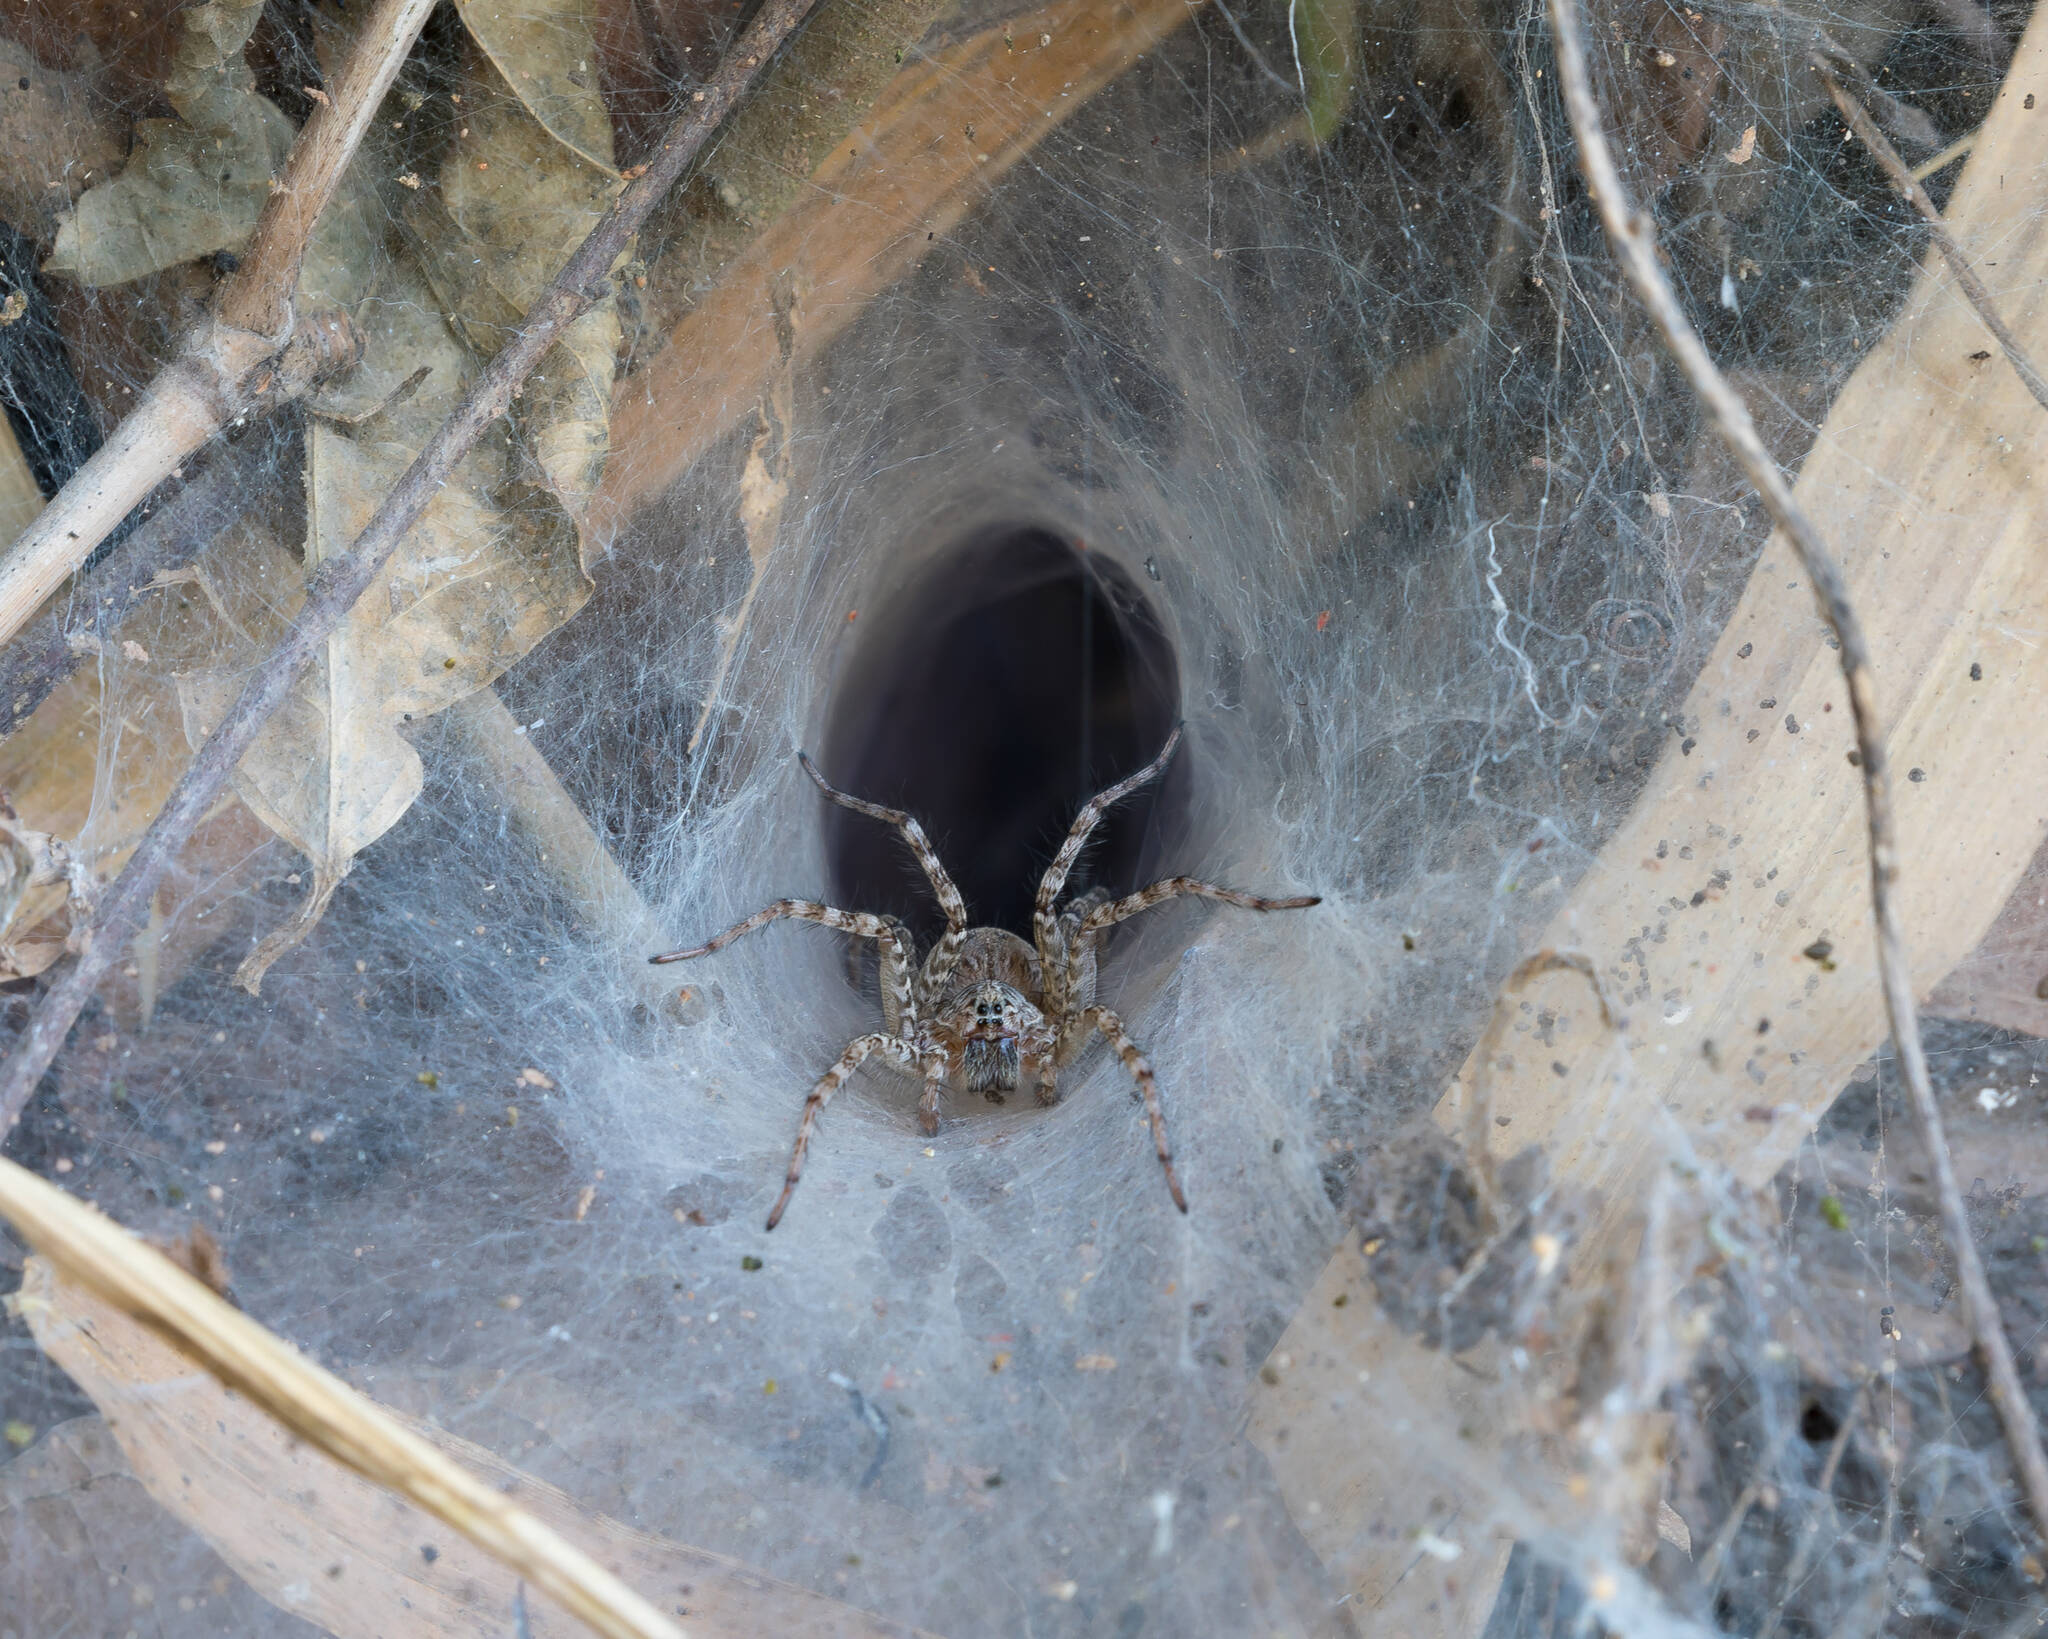 This photo available under a Creative Commons license shows a lawn wolf spider in its funnel web in Laos. (Courtesy Photo / Basile Morin)